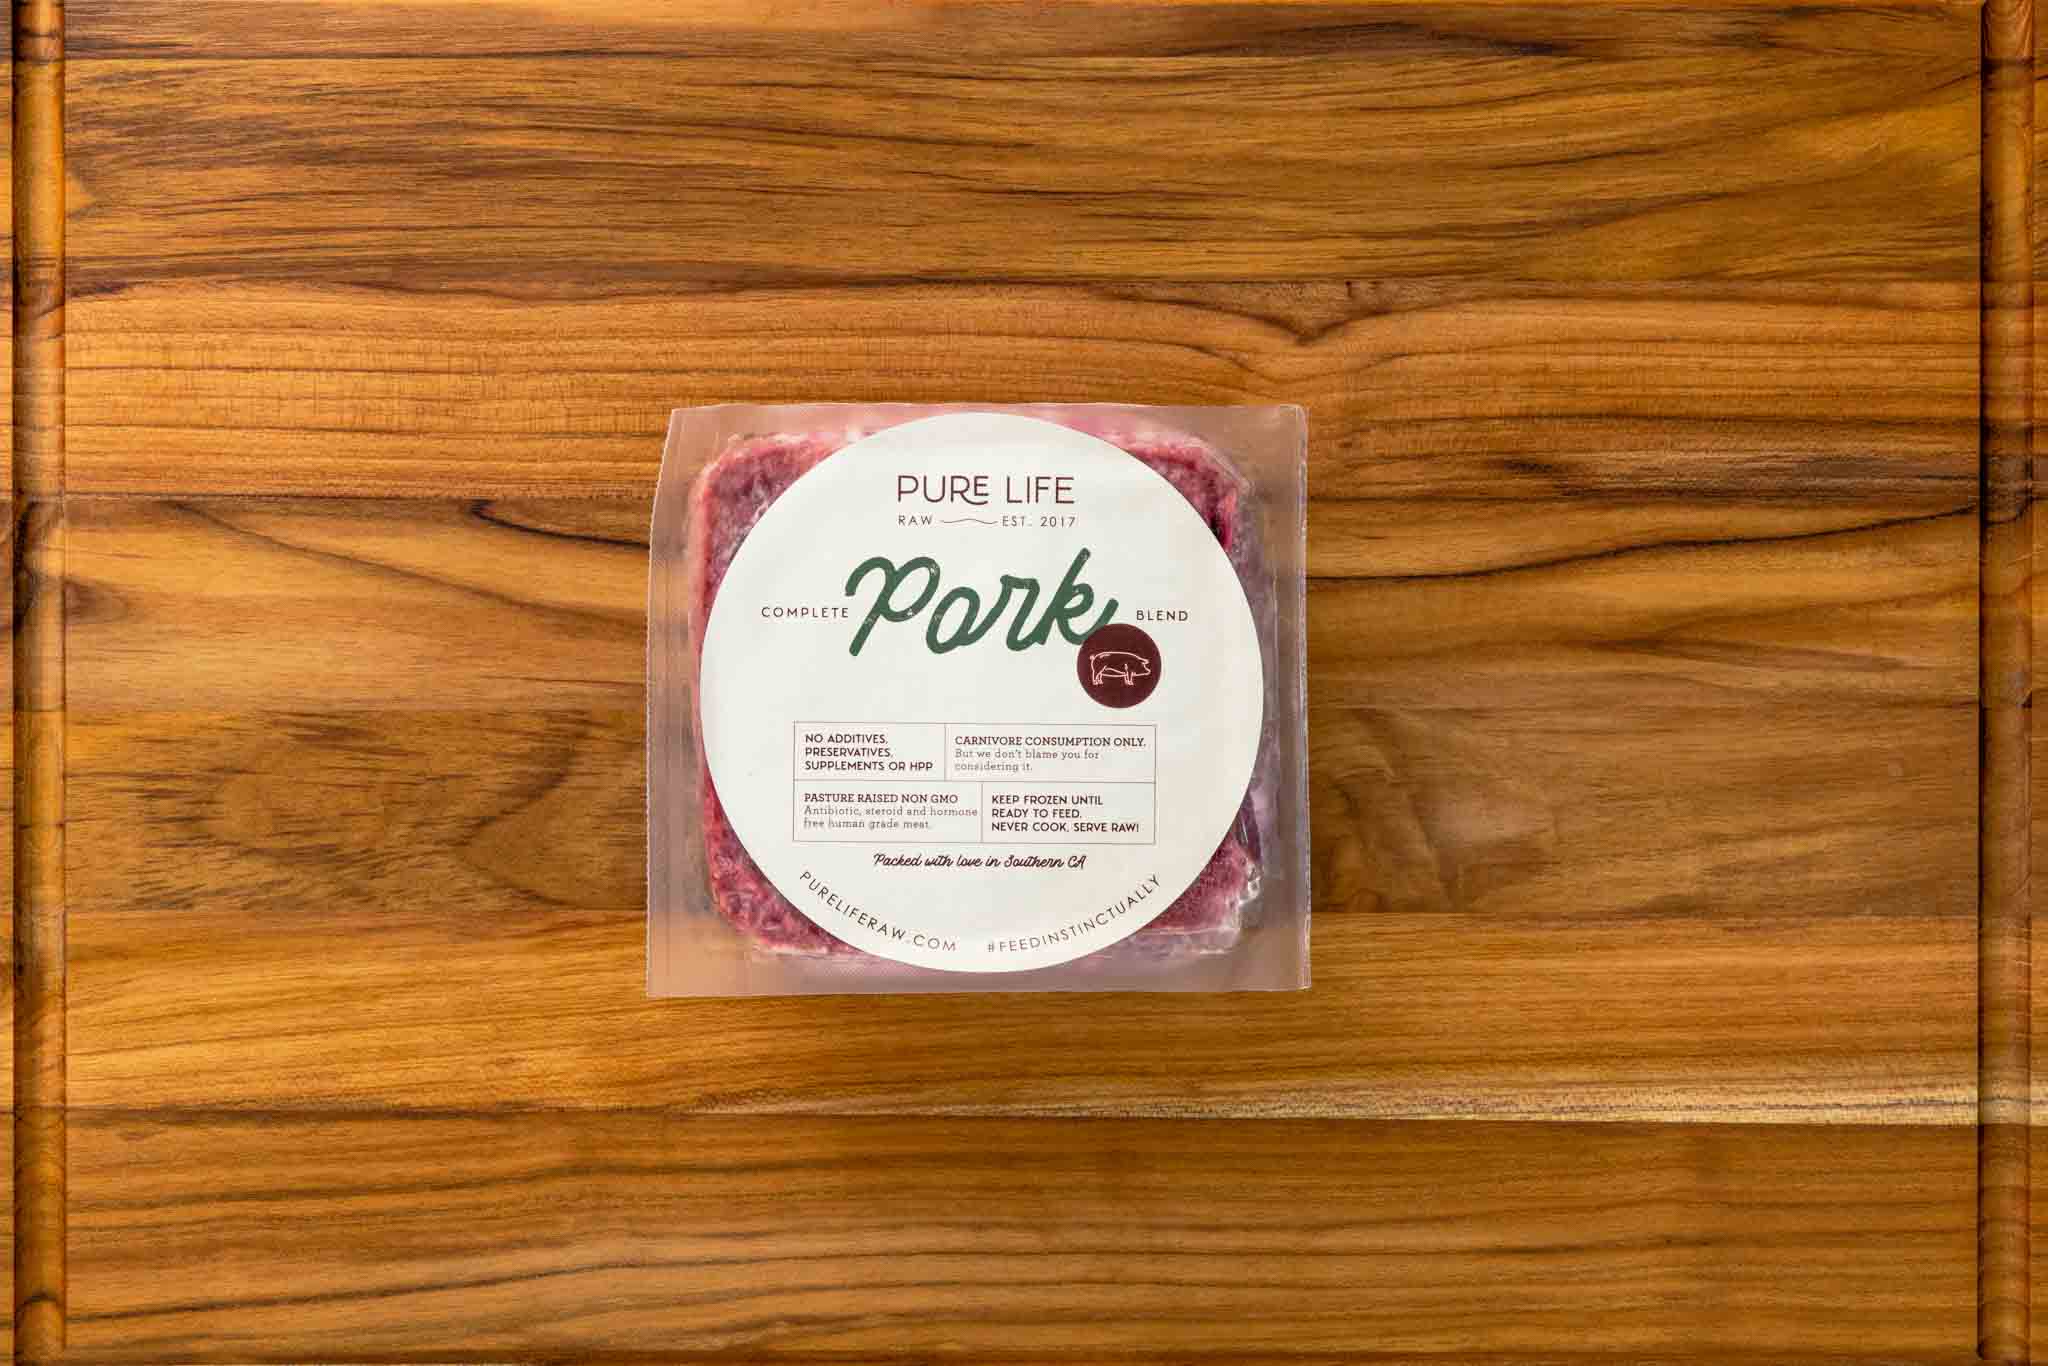 Packaged Raw Pork Blend 2 - Pet Food - Pure Life Raw